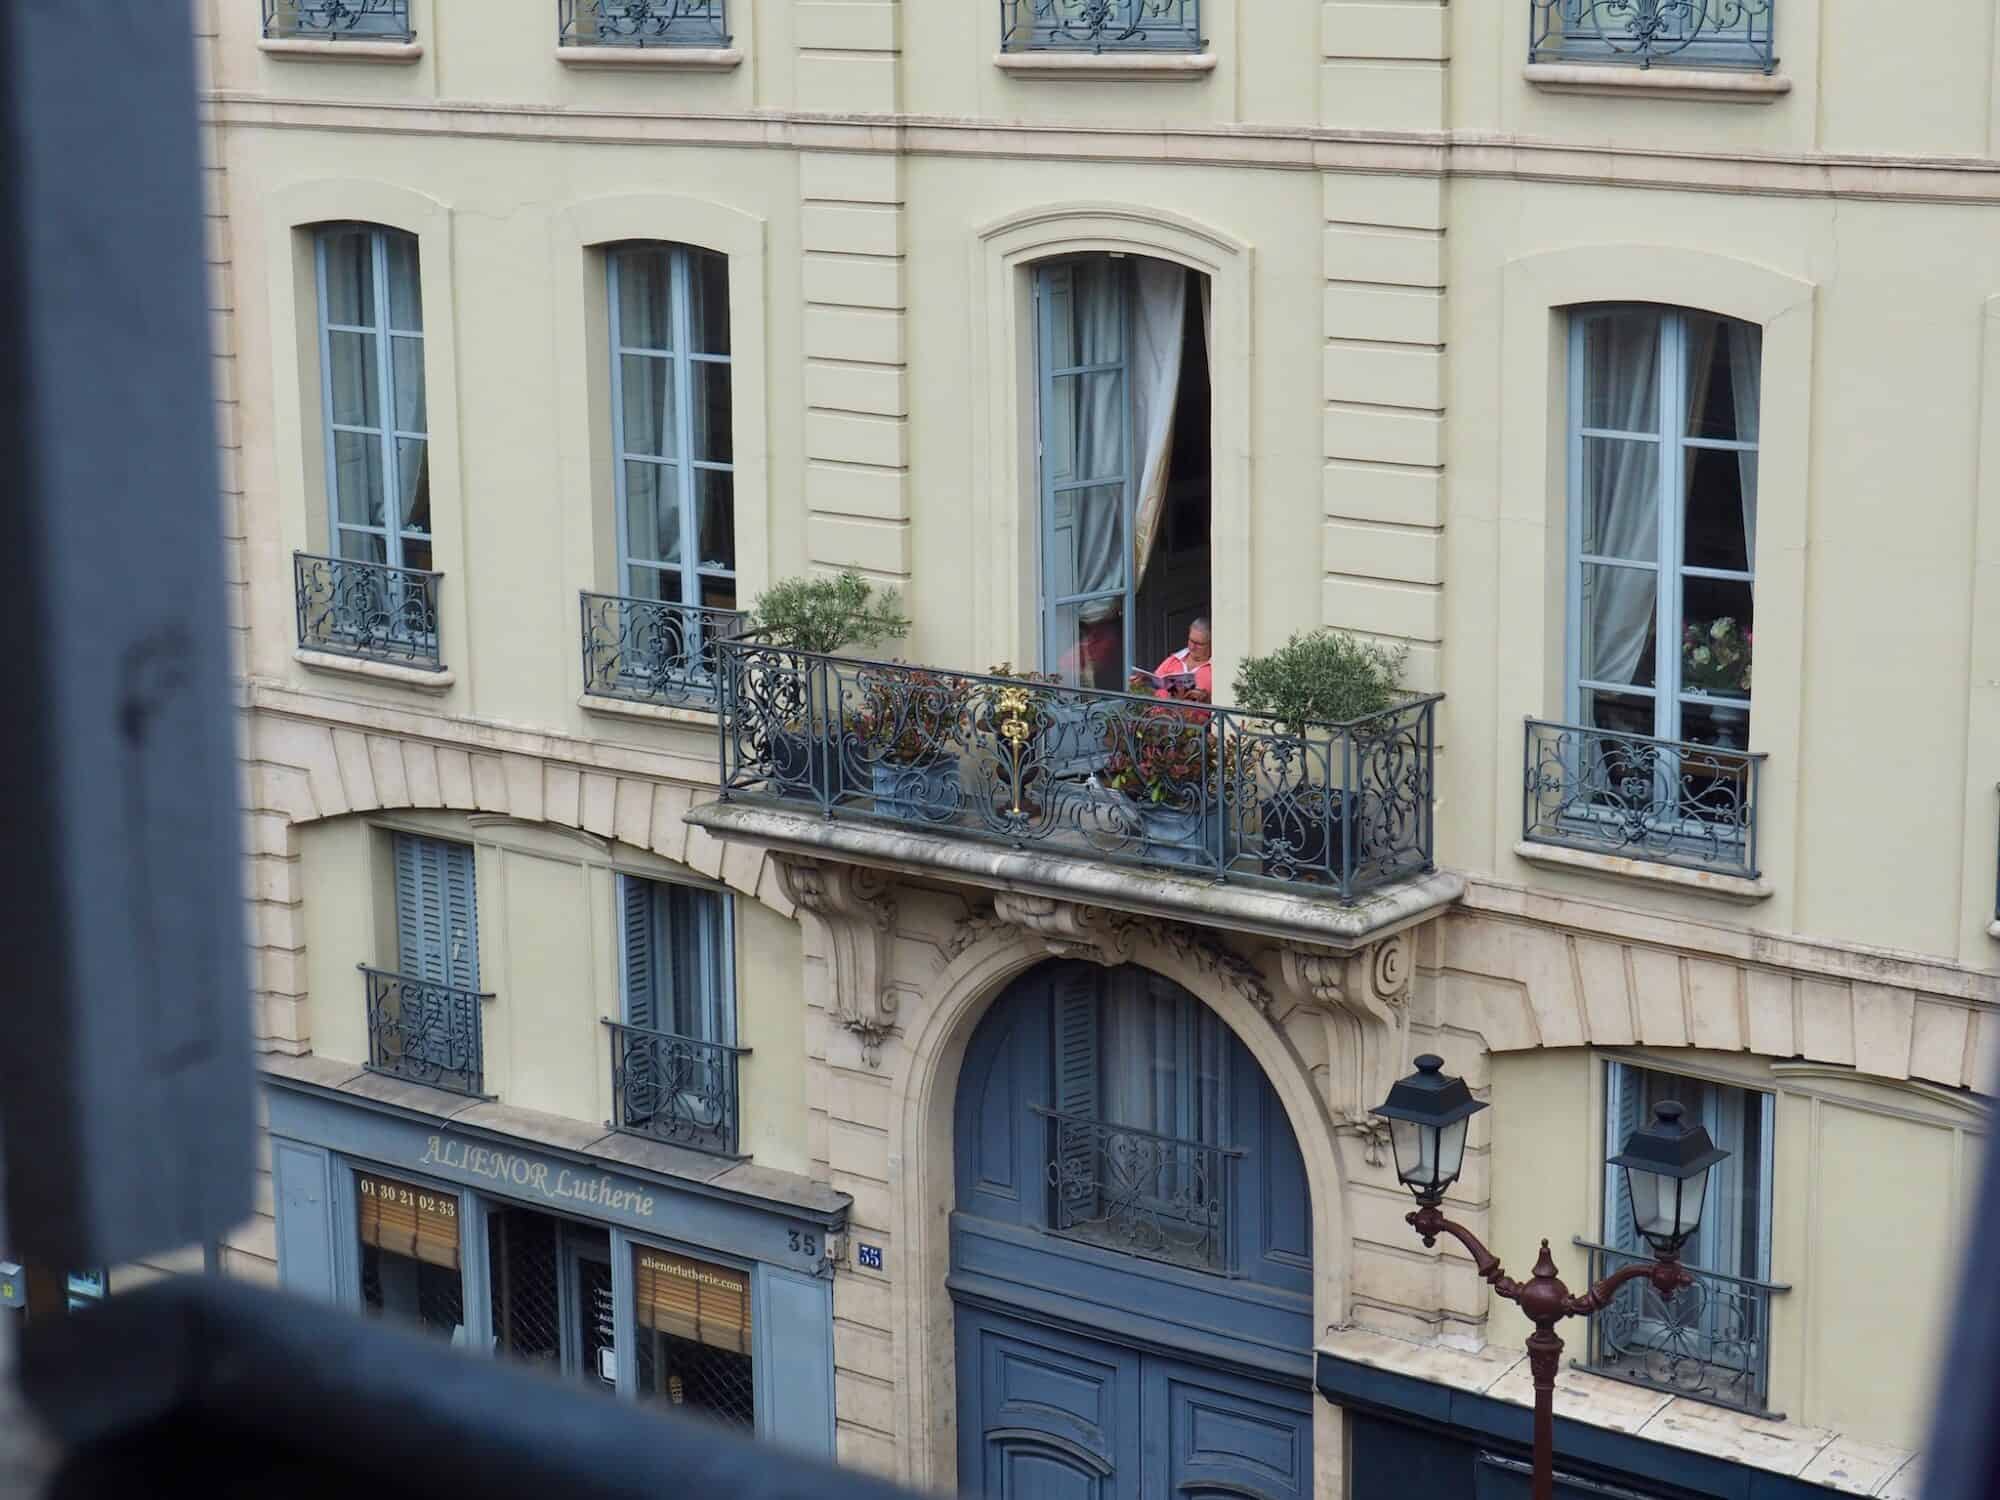 A woman in a pink shirts reads on her balcony in Paris, with her large door open and plants next to her on the balcony.